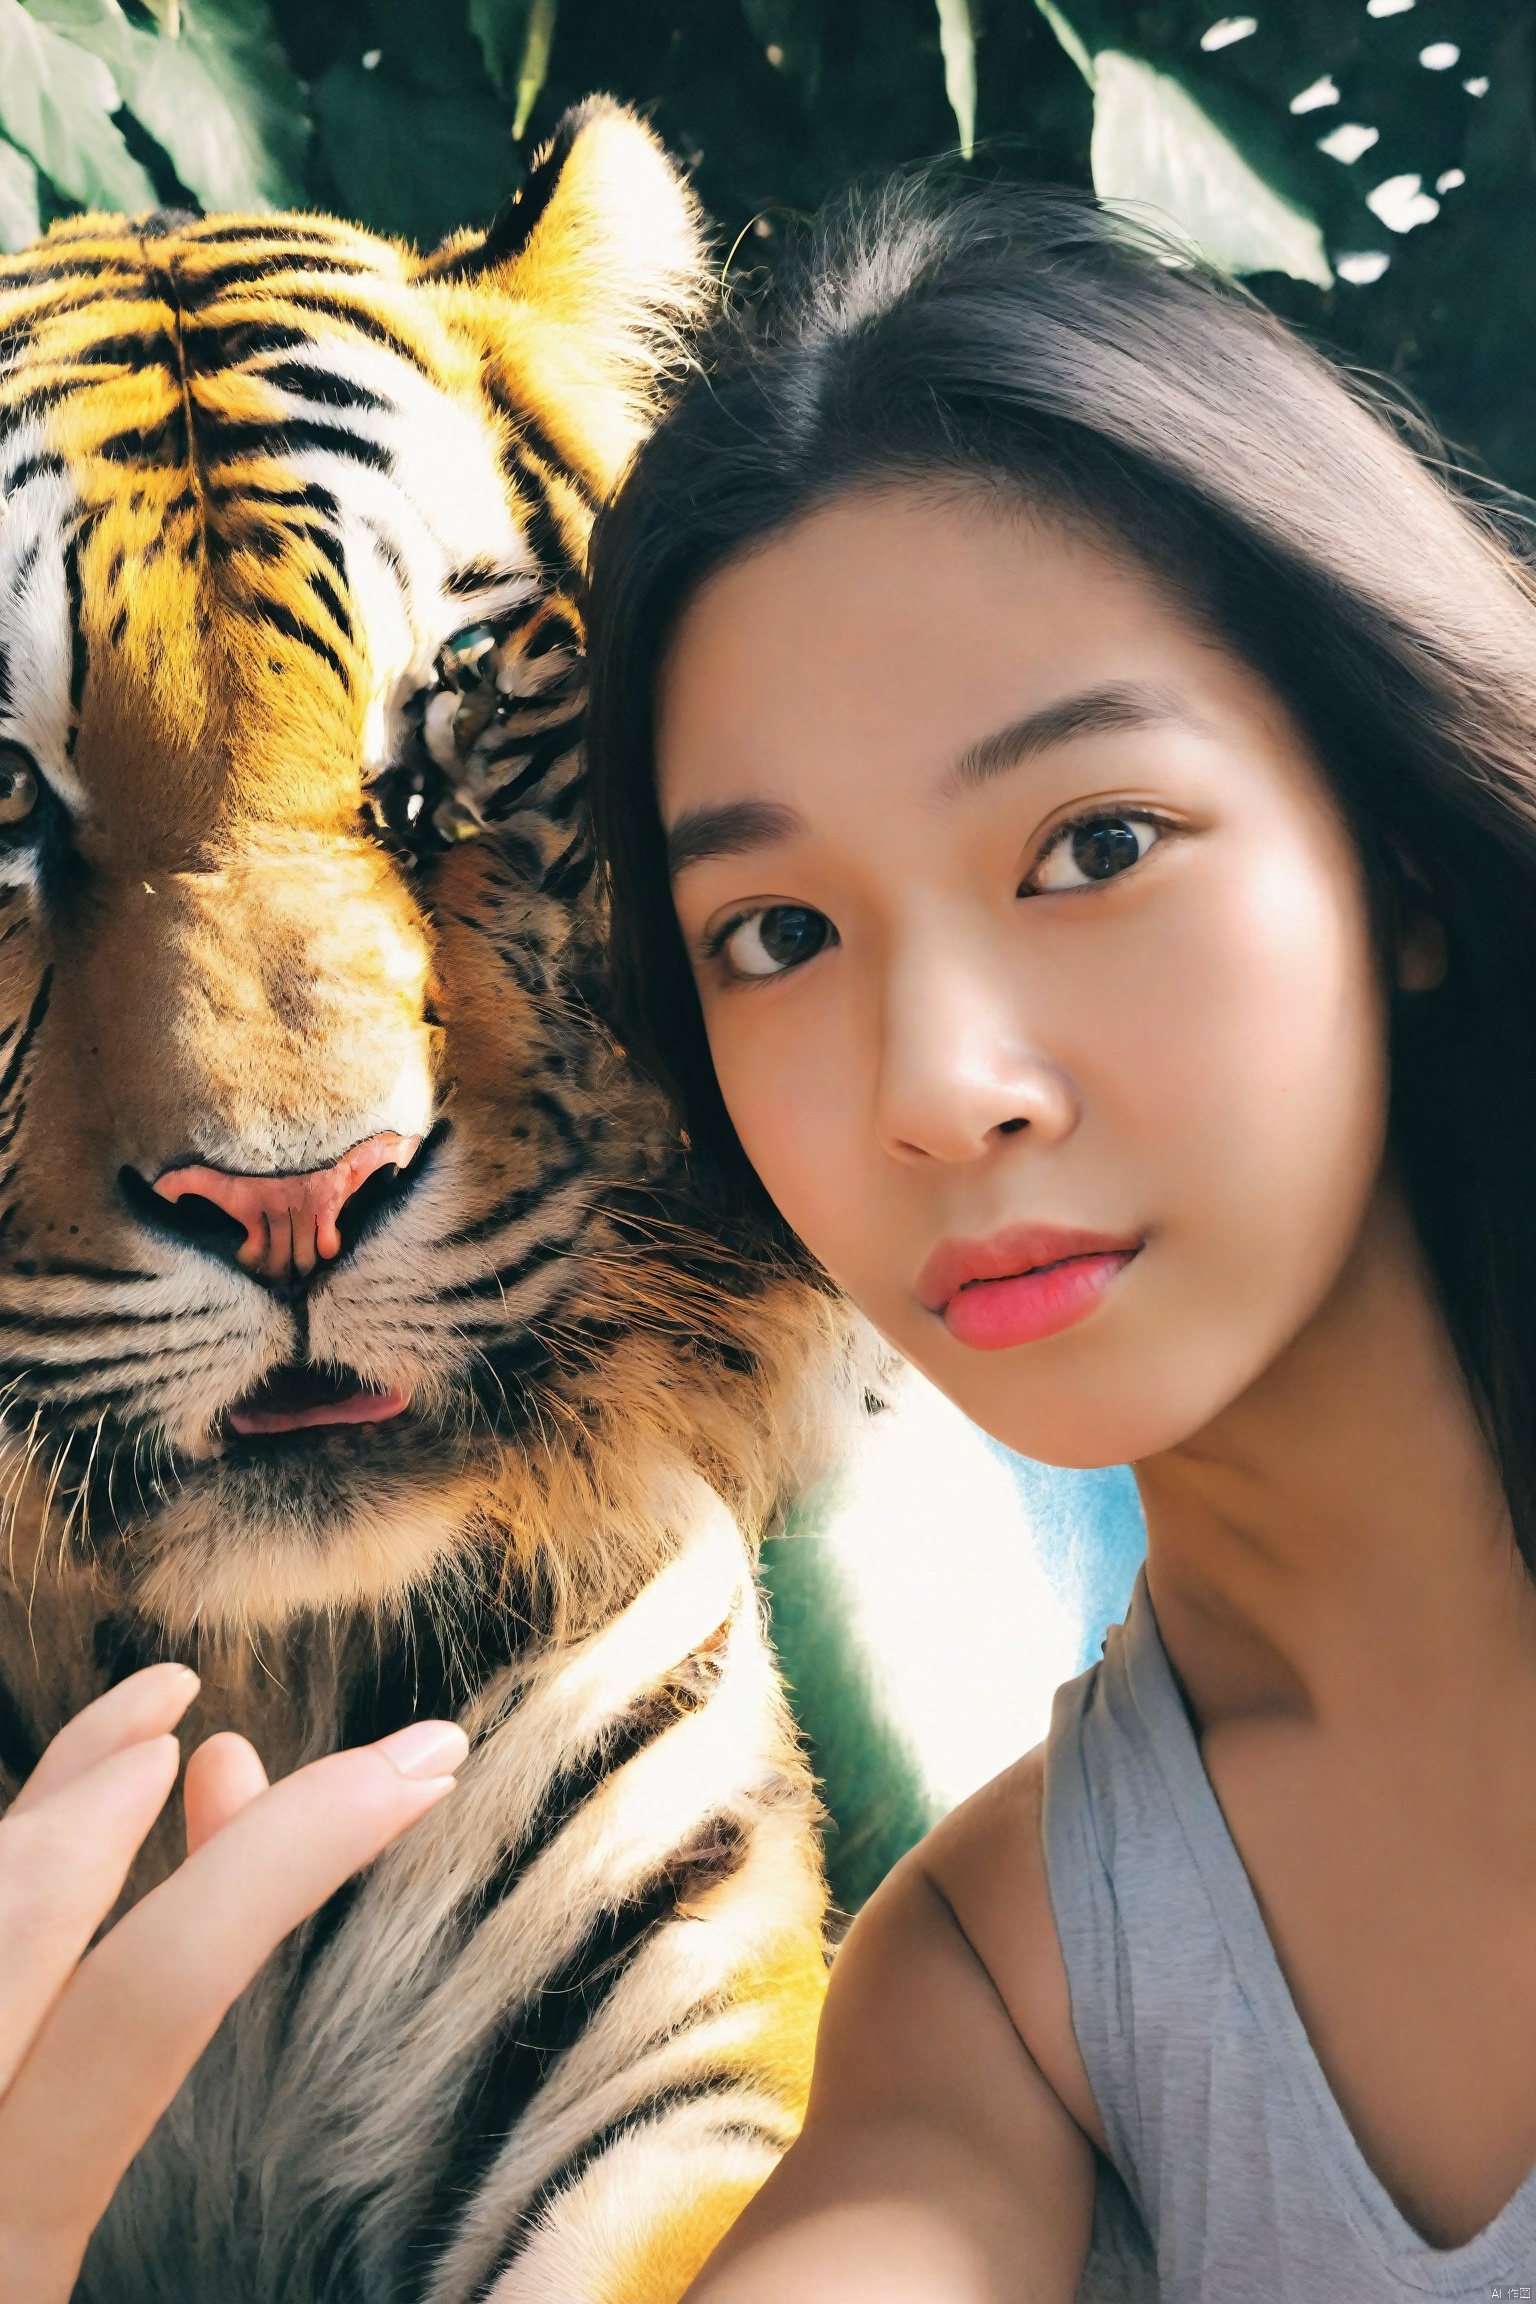 In a selfie perspective, a girl is closely pressed against a majestic tiger, her hand holding a phone, ready to capture this incredible moment. Her expression is a mix of excitement and slight nervousness, her eyes tightly fixed on the camera lens, her black pupils appearing particularly bright under the glow of the phone screen. Behind her, the tiger's fur presents golden and black stripes in the faint sunlight, its gaze calm and profound, contrasting sharply with the girl's tension. The surrounding environment is a jungle, with sunlight filtering through the gaps in the leaves, casting mottled light on them, adding a sense of mystery and wild beauty to the scene. The phone's flash is ready to provide additional lighting, making the entire selfie full of vivid details and contrasting light and shadow.